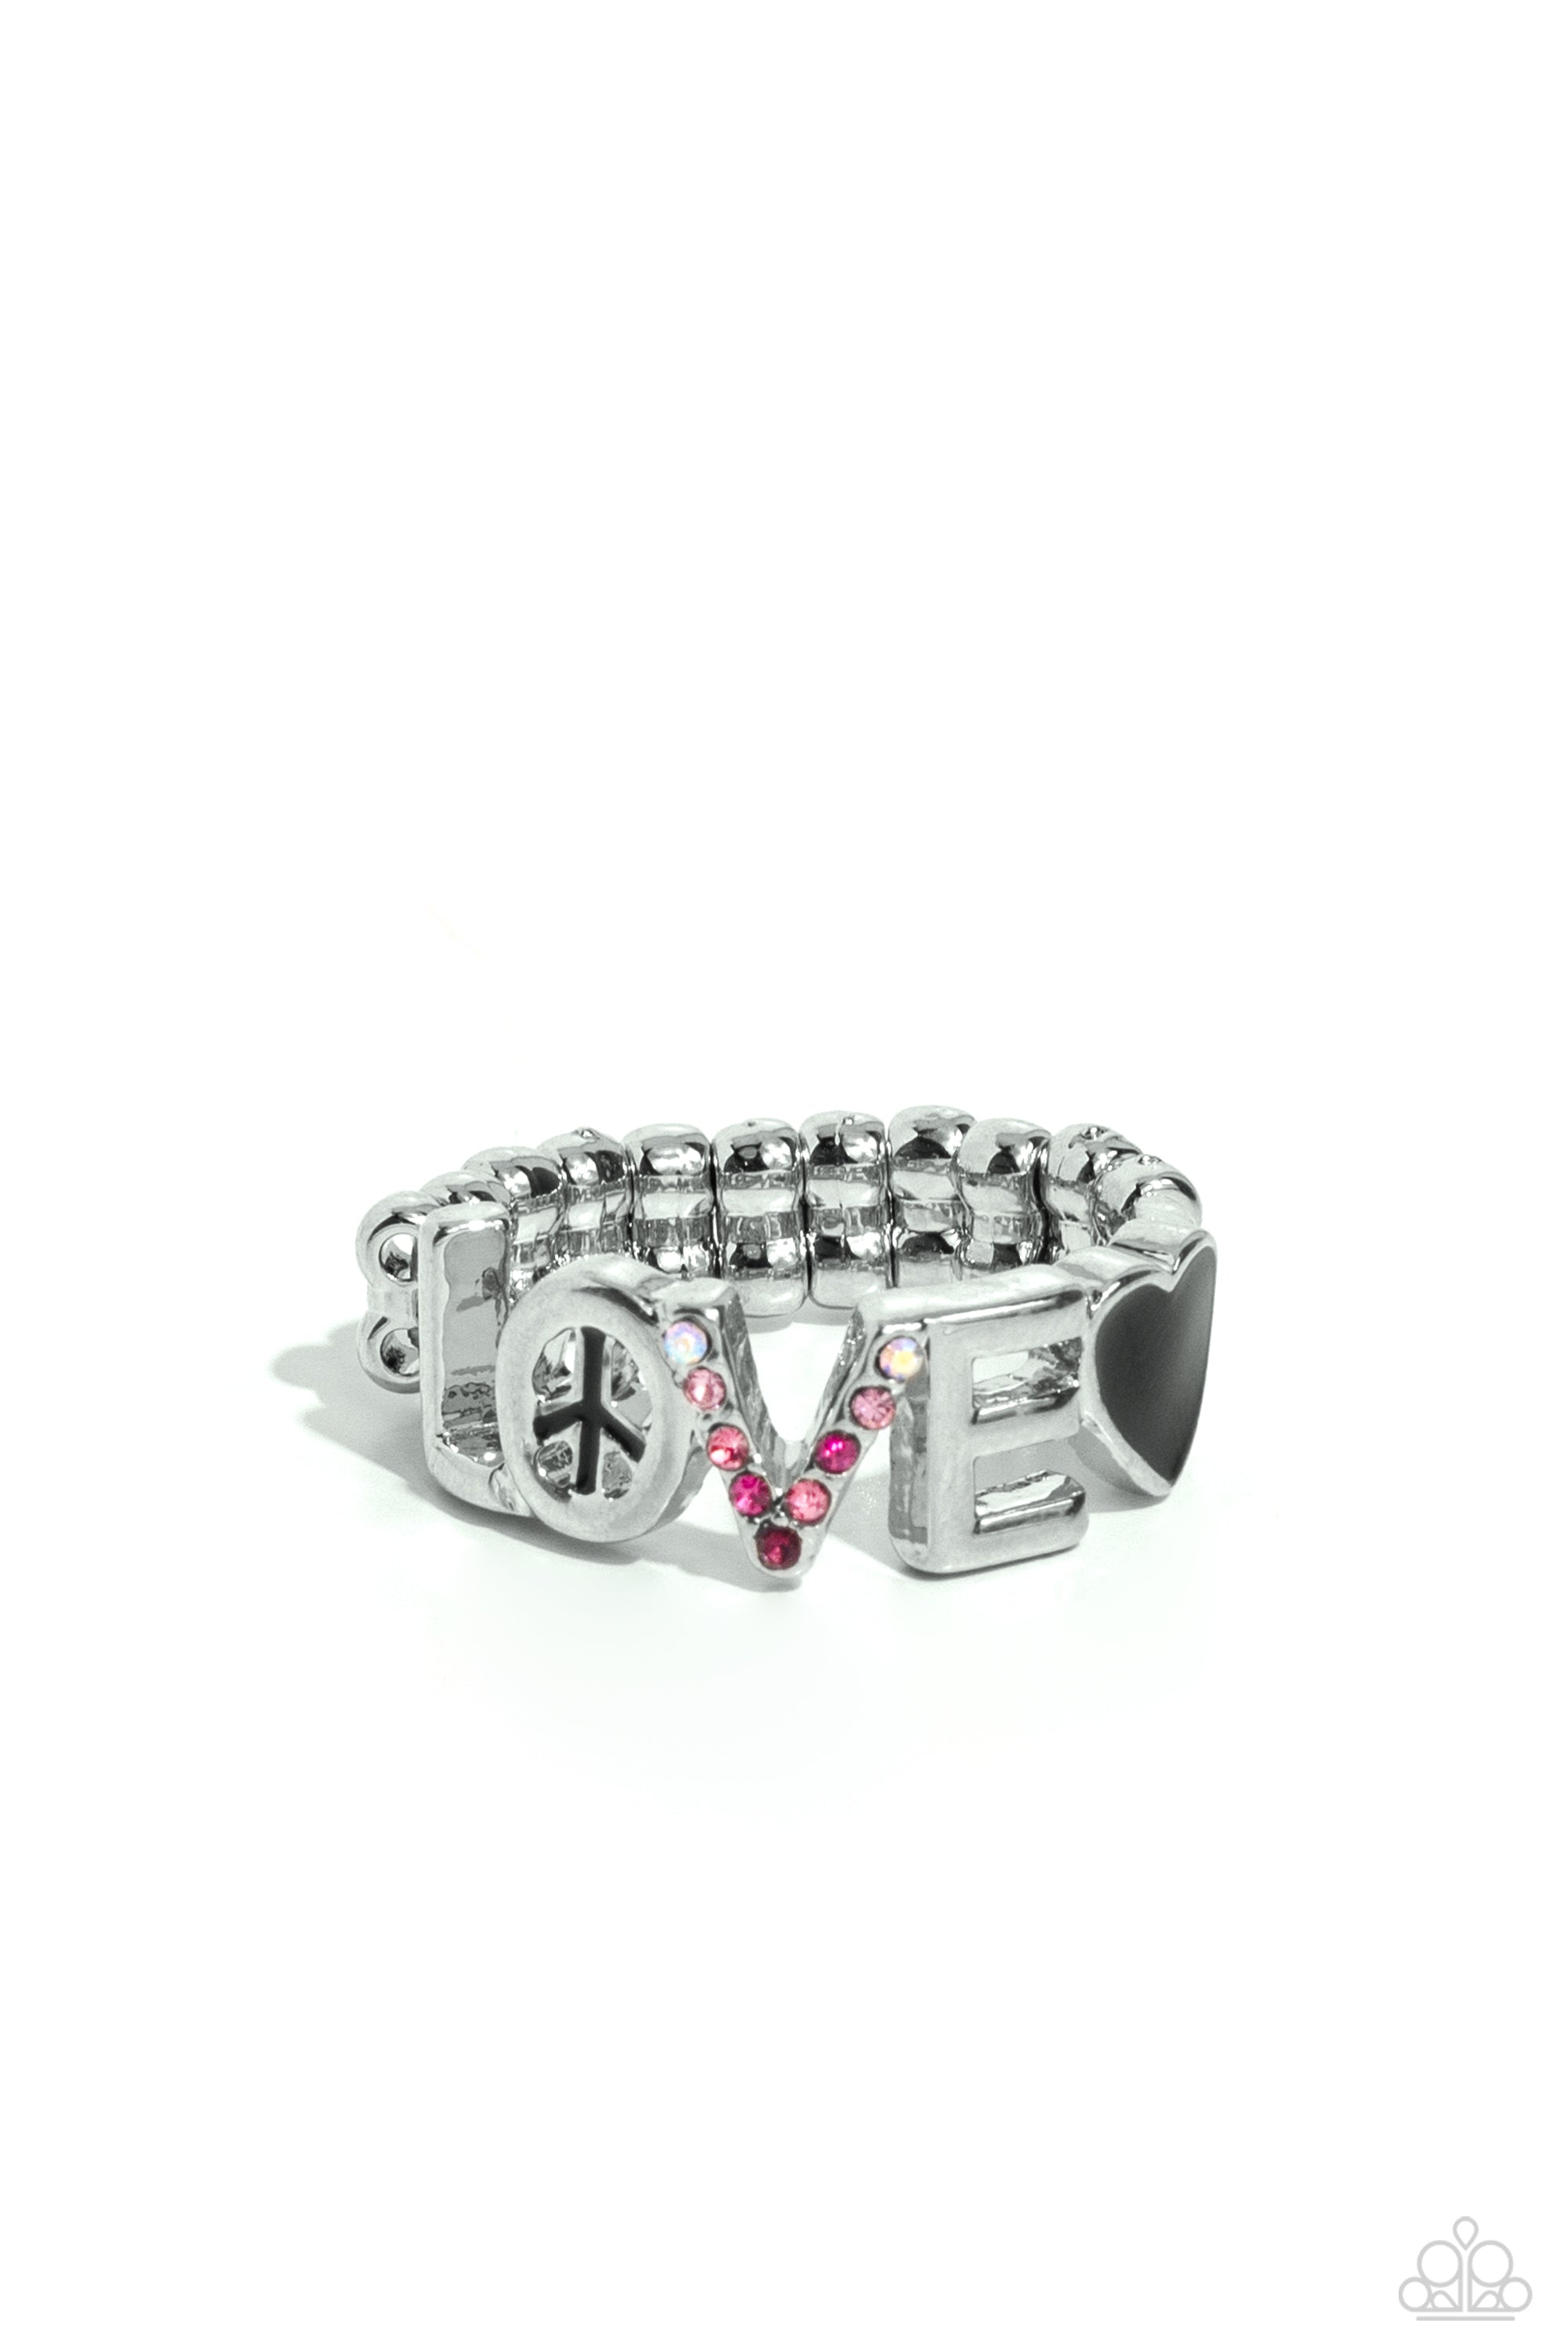 Unlimited Love Black & Silver Inspirational Ring - Paparazzi Accessories- lightbox - CarasShop.com - $5 Jewelry by Cara Jewels